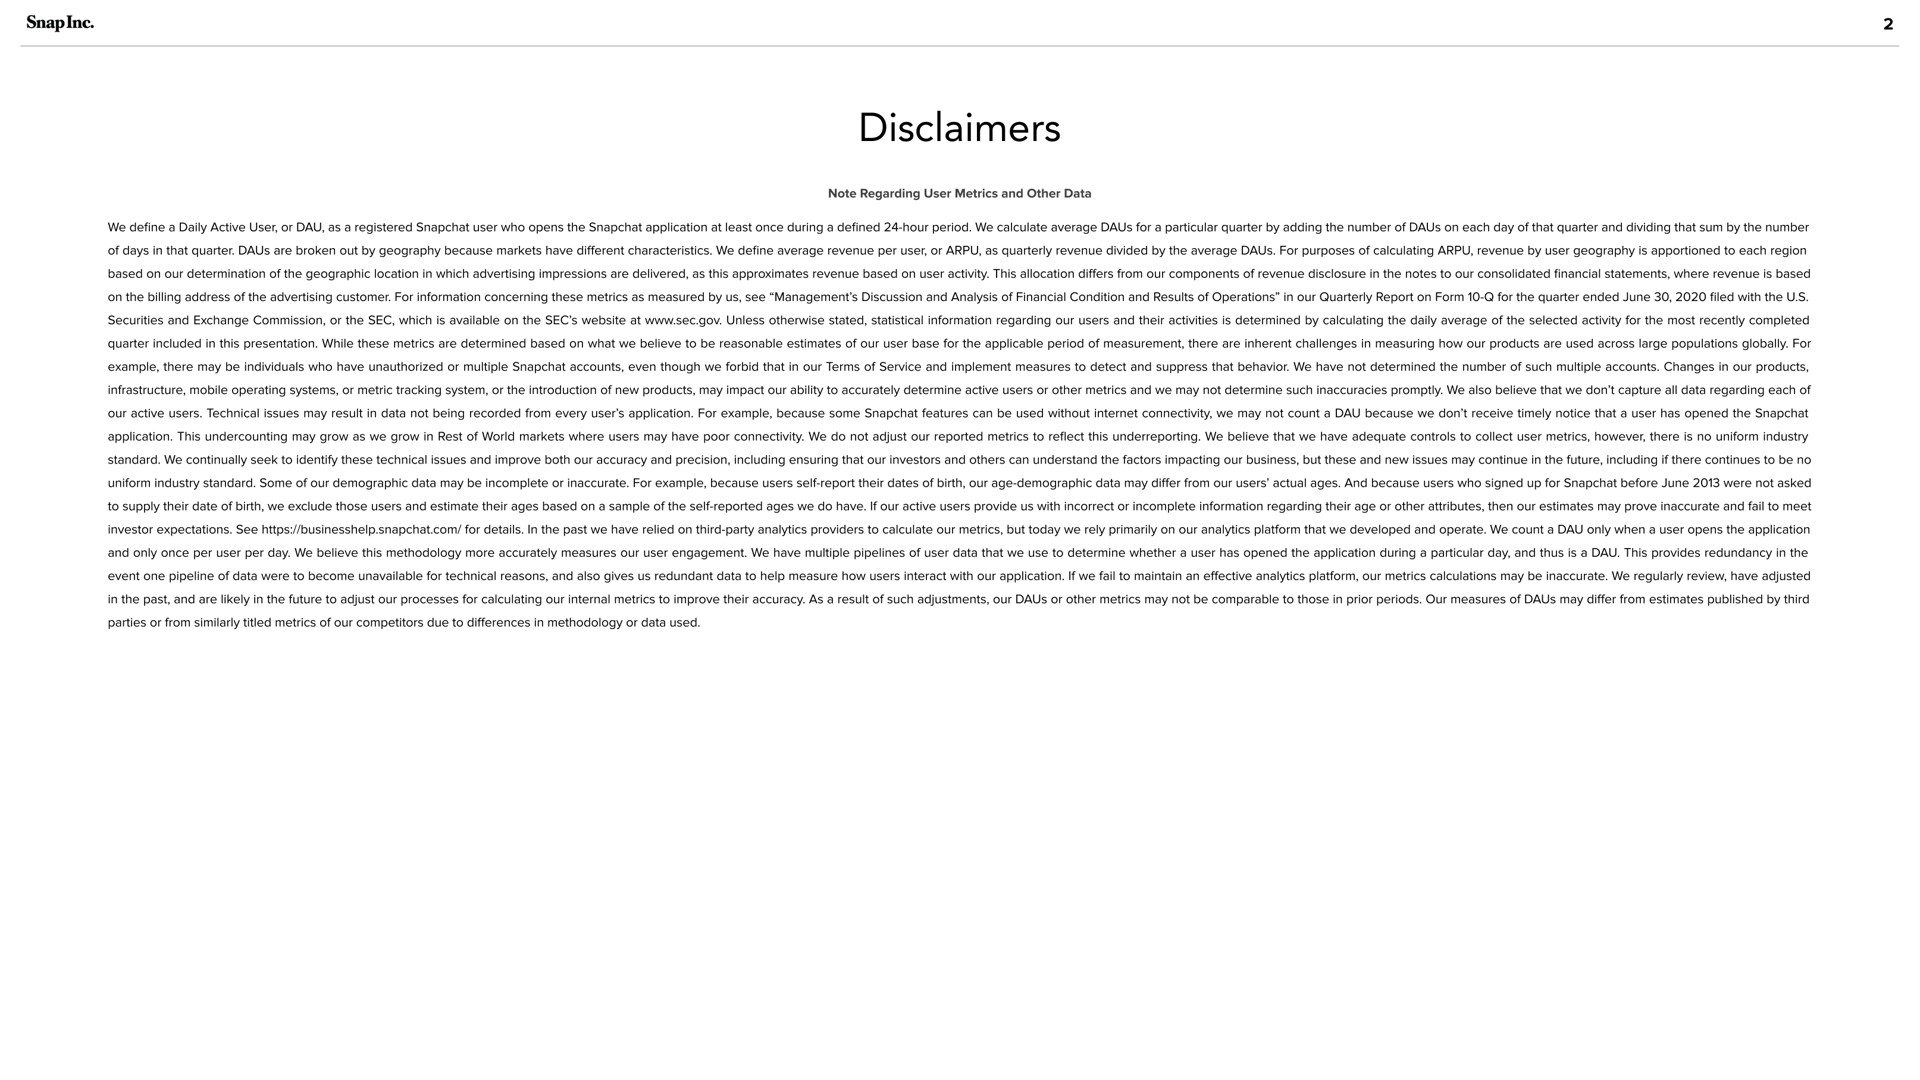 disclaimers | Snap Inc